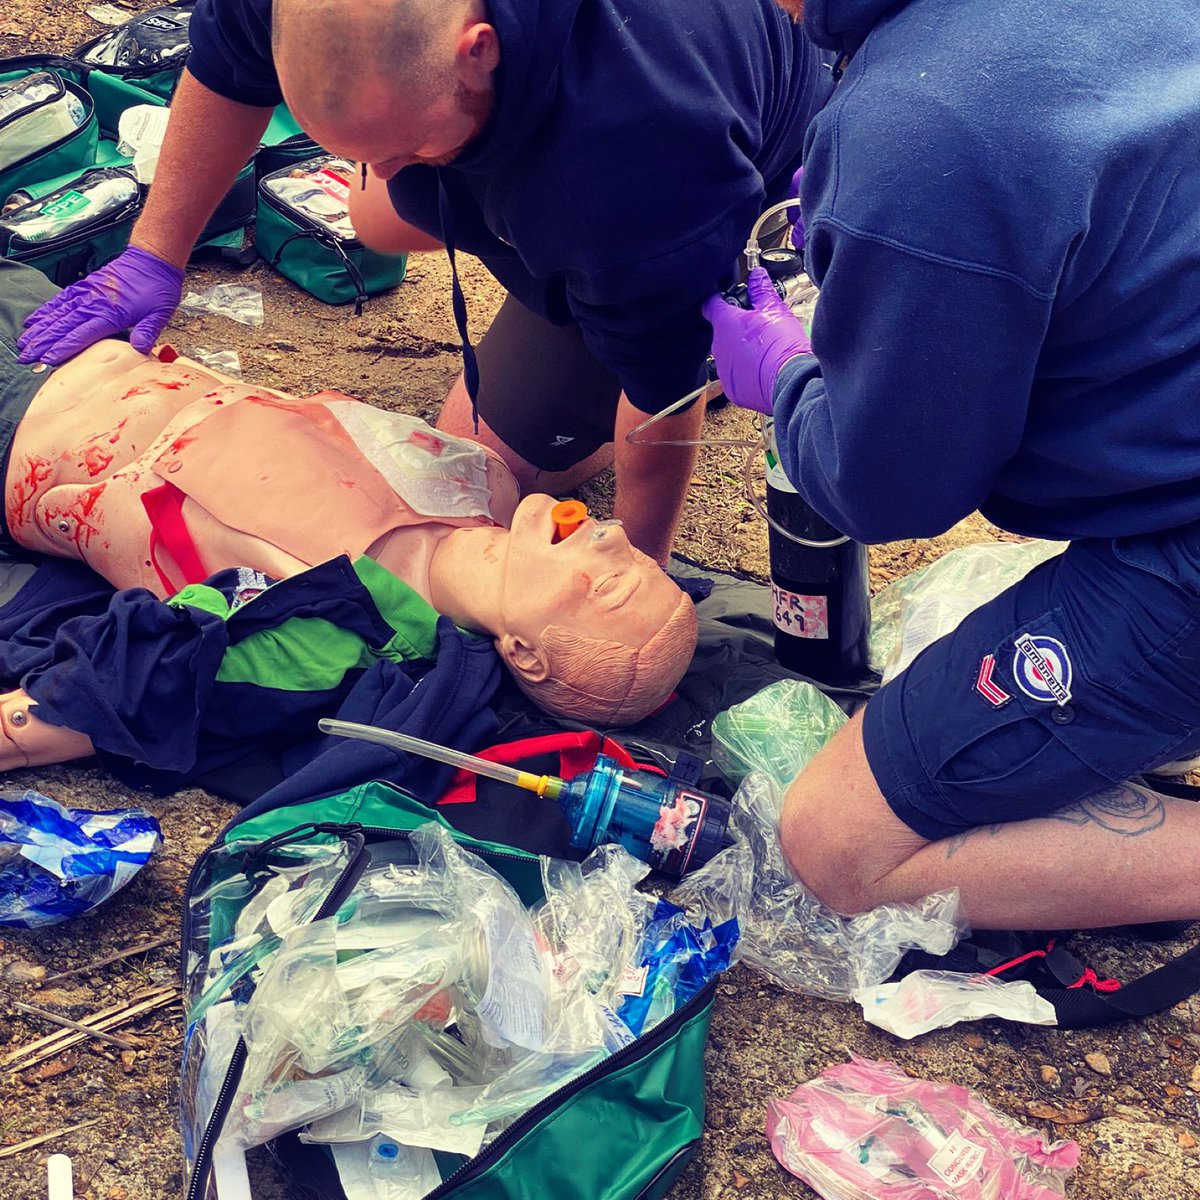 We have some rare open spaces on an upcoming Rescue Trauma and Casualty Care (RTACC) Course in Sept. Join us in #Surrey to learn how to manage life-threatening trauma. eventbrite.co.uk/e/rescue-traum… #trauma #firstaid #rtacc #prehospital #phem #atacc